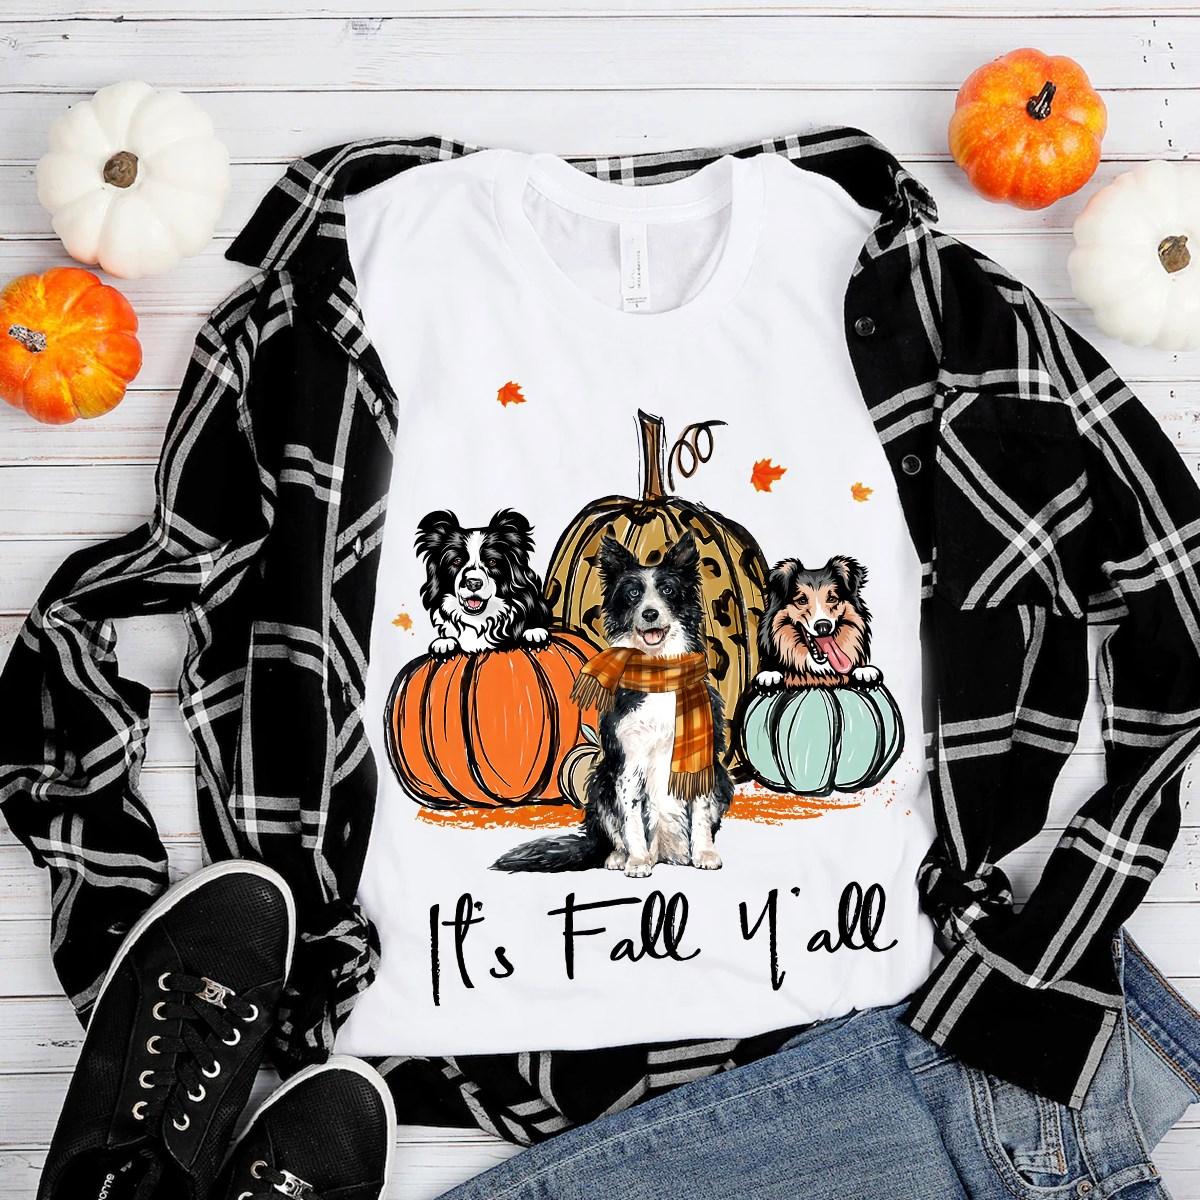 It's fall y'all - Australian Shepherd dog, Dog and pumpkins, Thanksgiving day gift